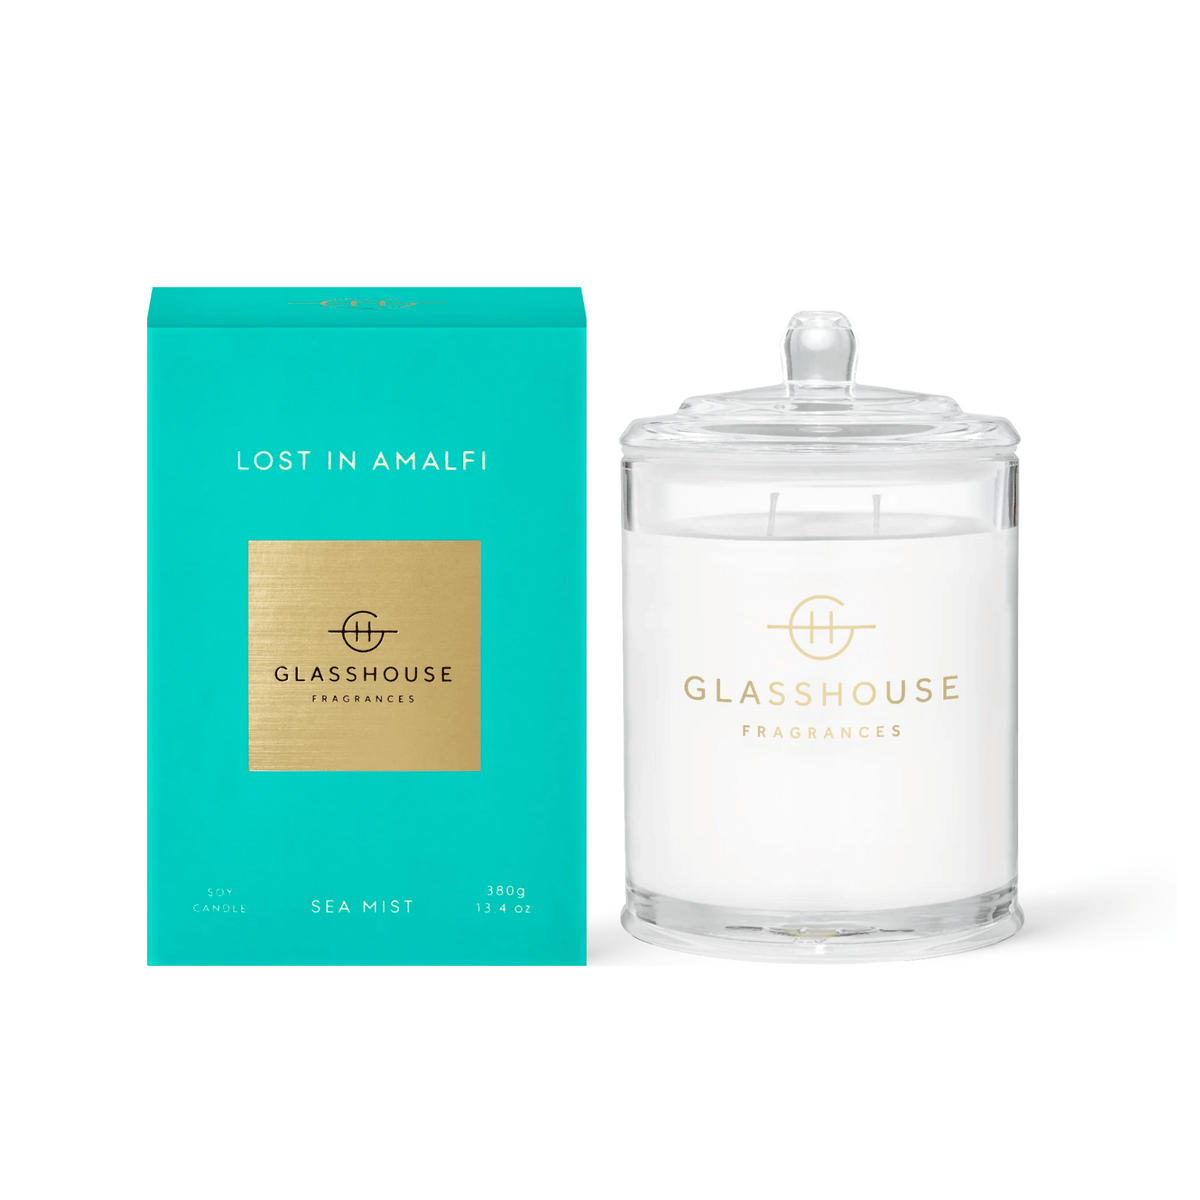 Primary Image of Lost in Amalfi Candle